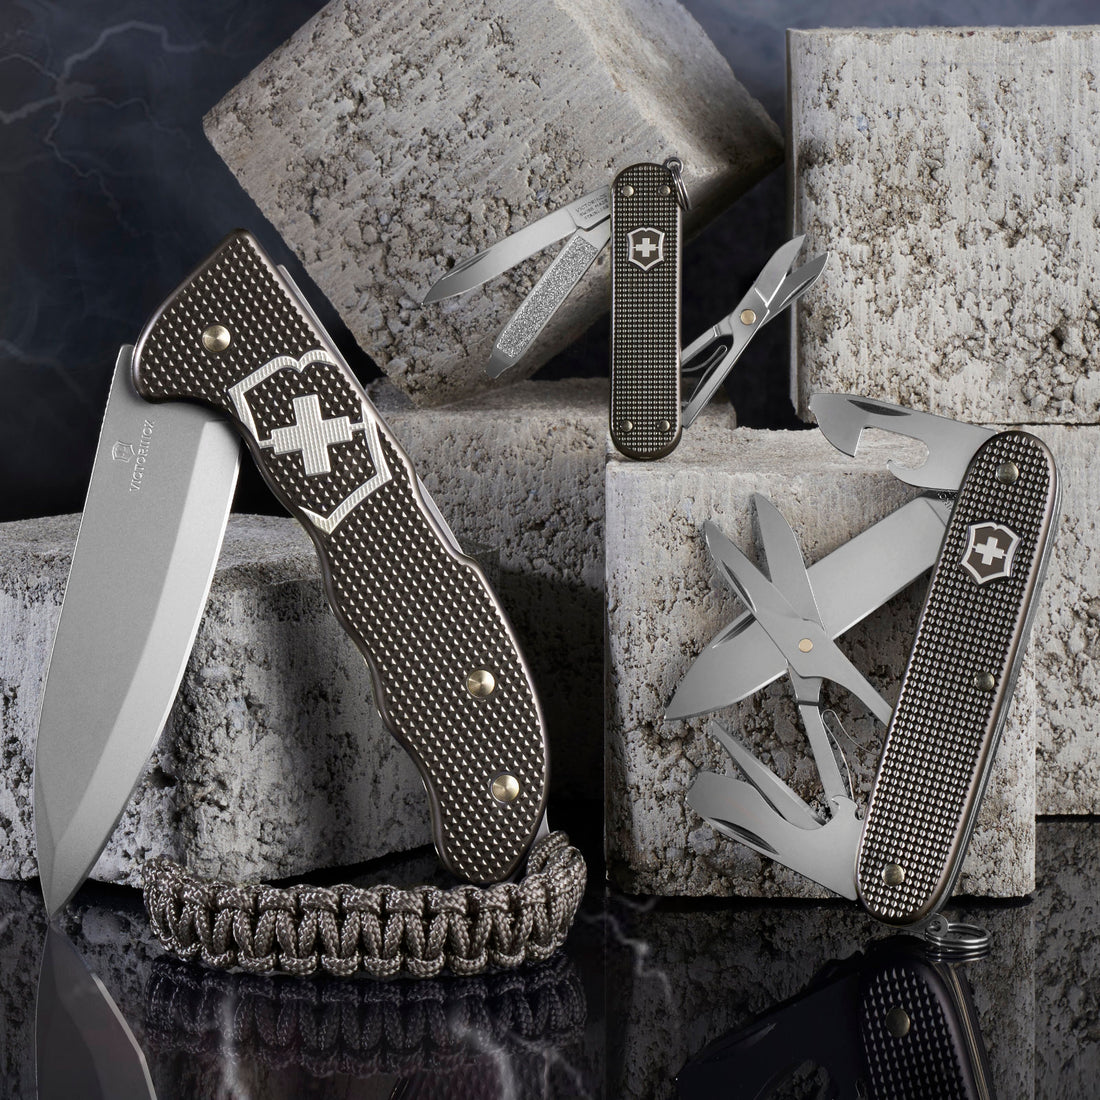 NEW! The 2022 Thunder Gray Alox Collection of Swiss Army Knives